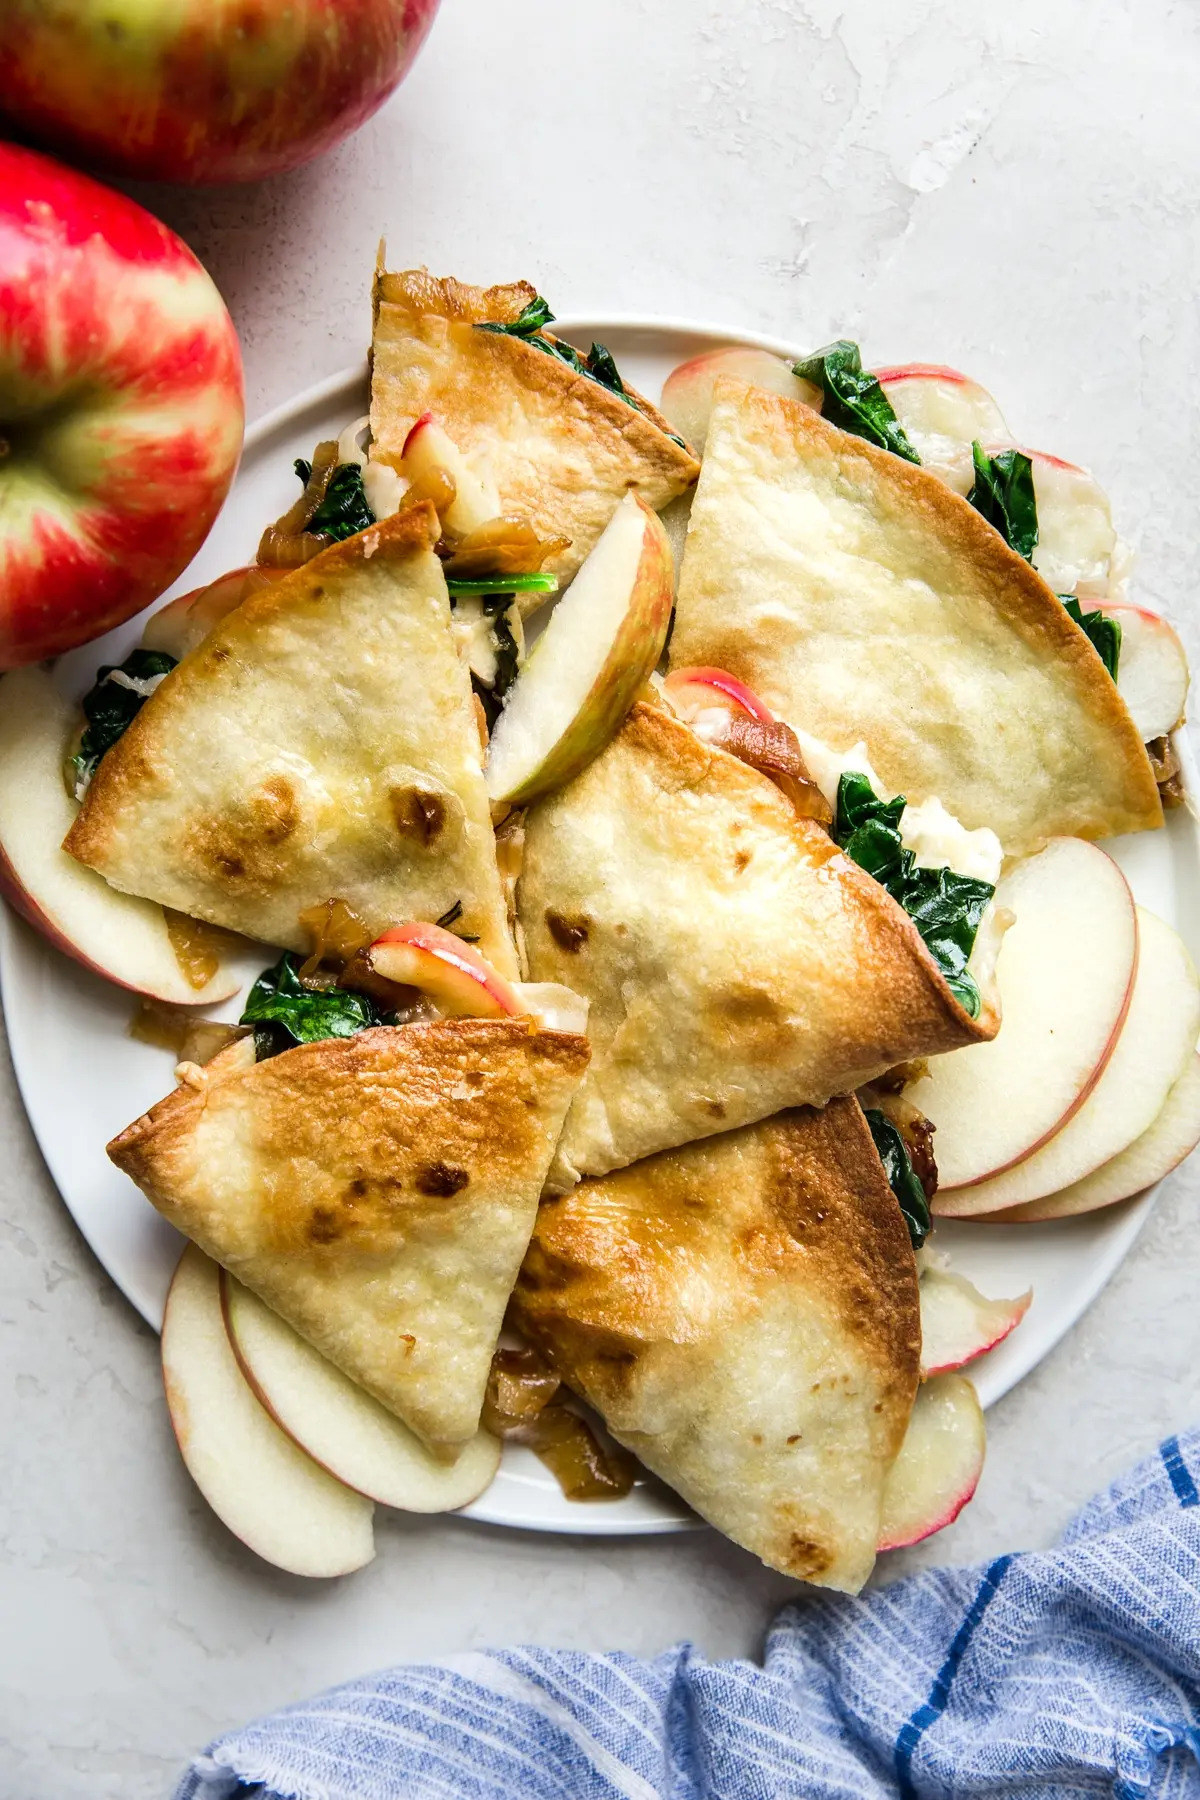 Apple, Caramelized Onion And Spinach Quesadilla